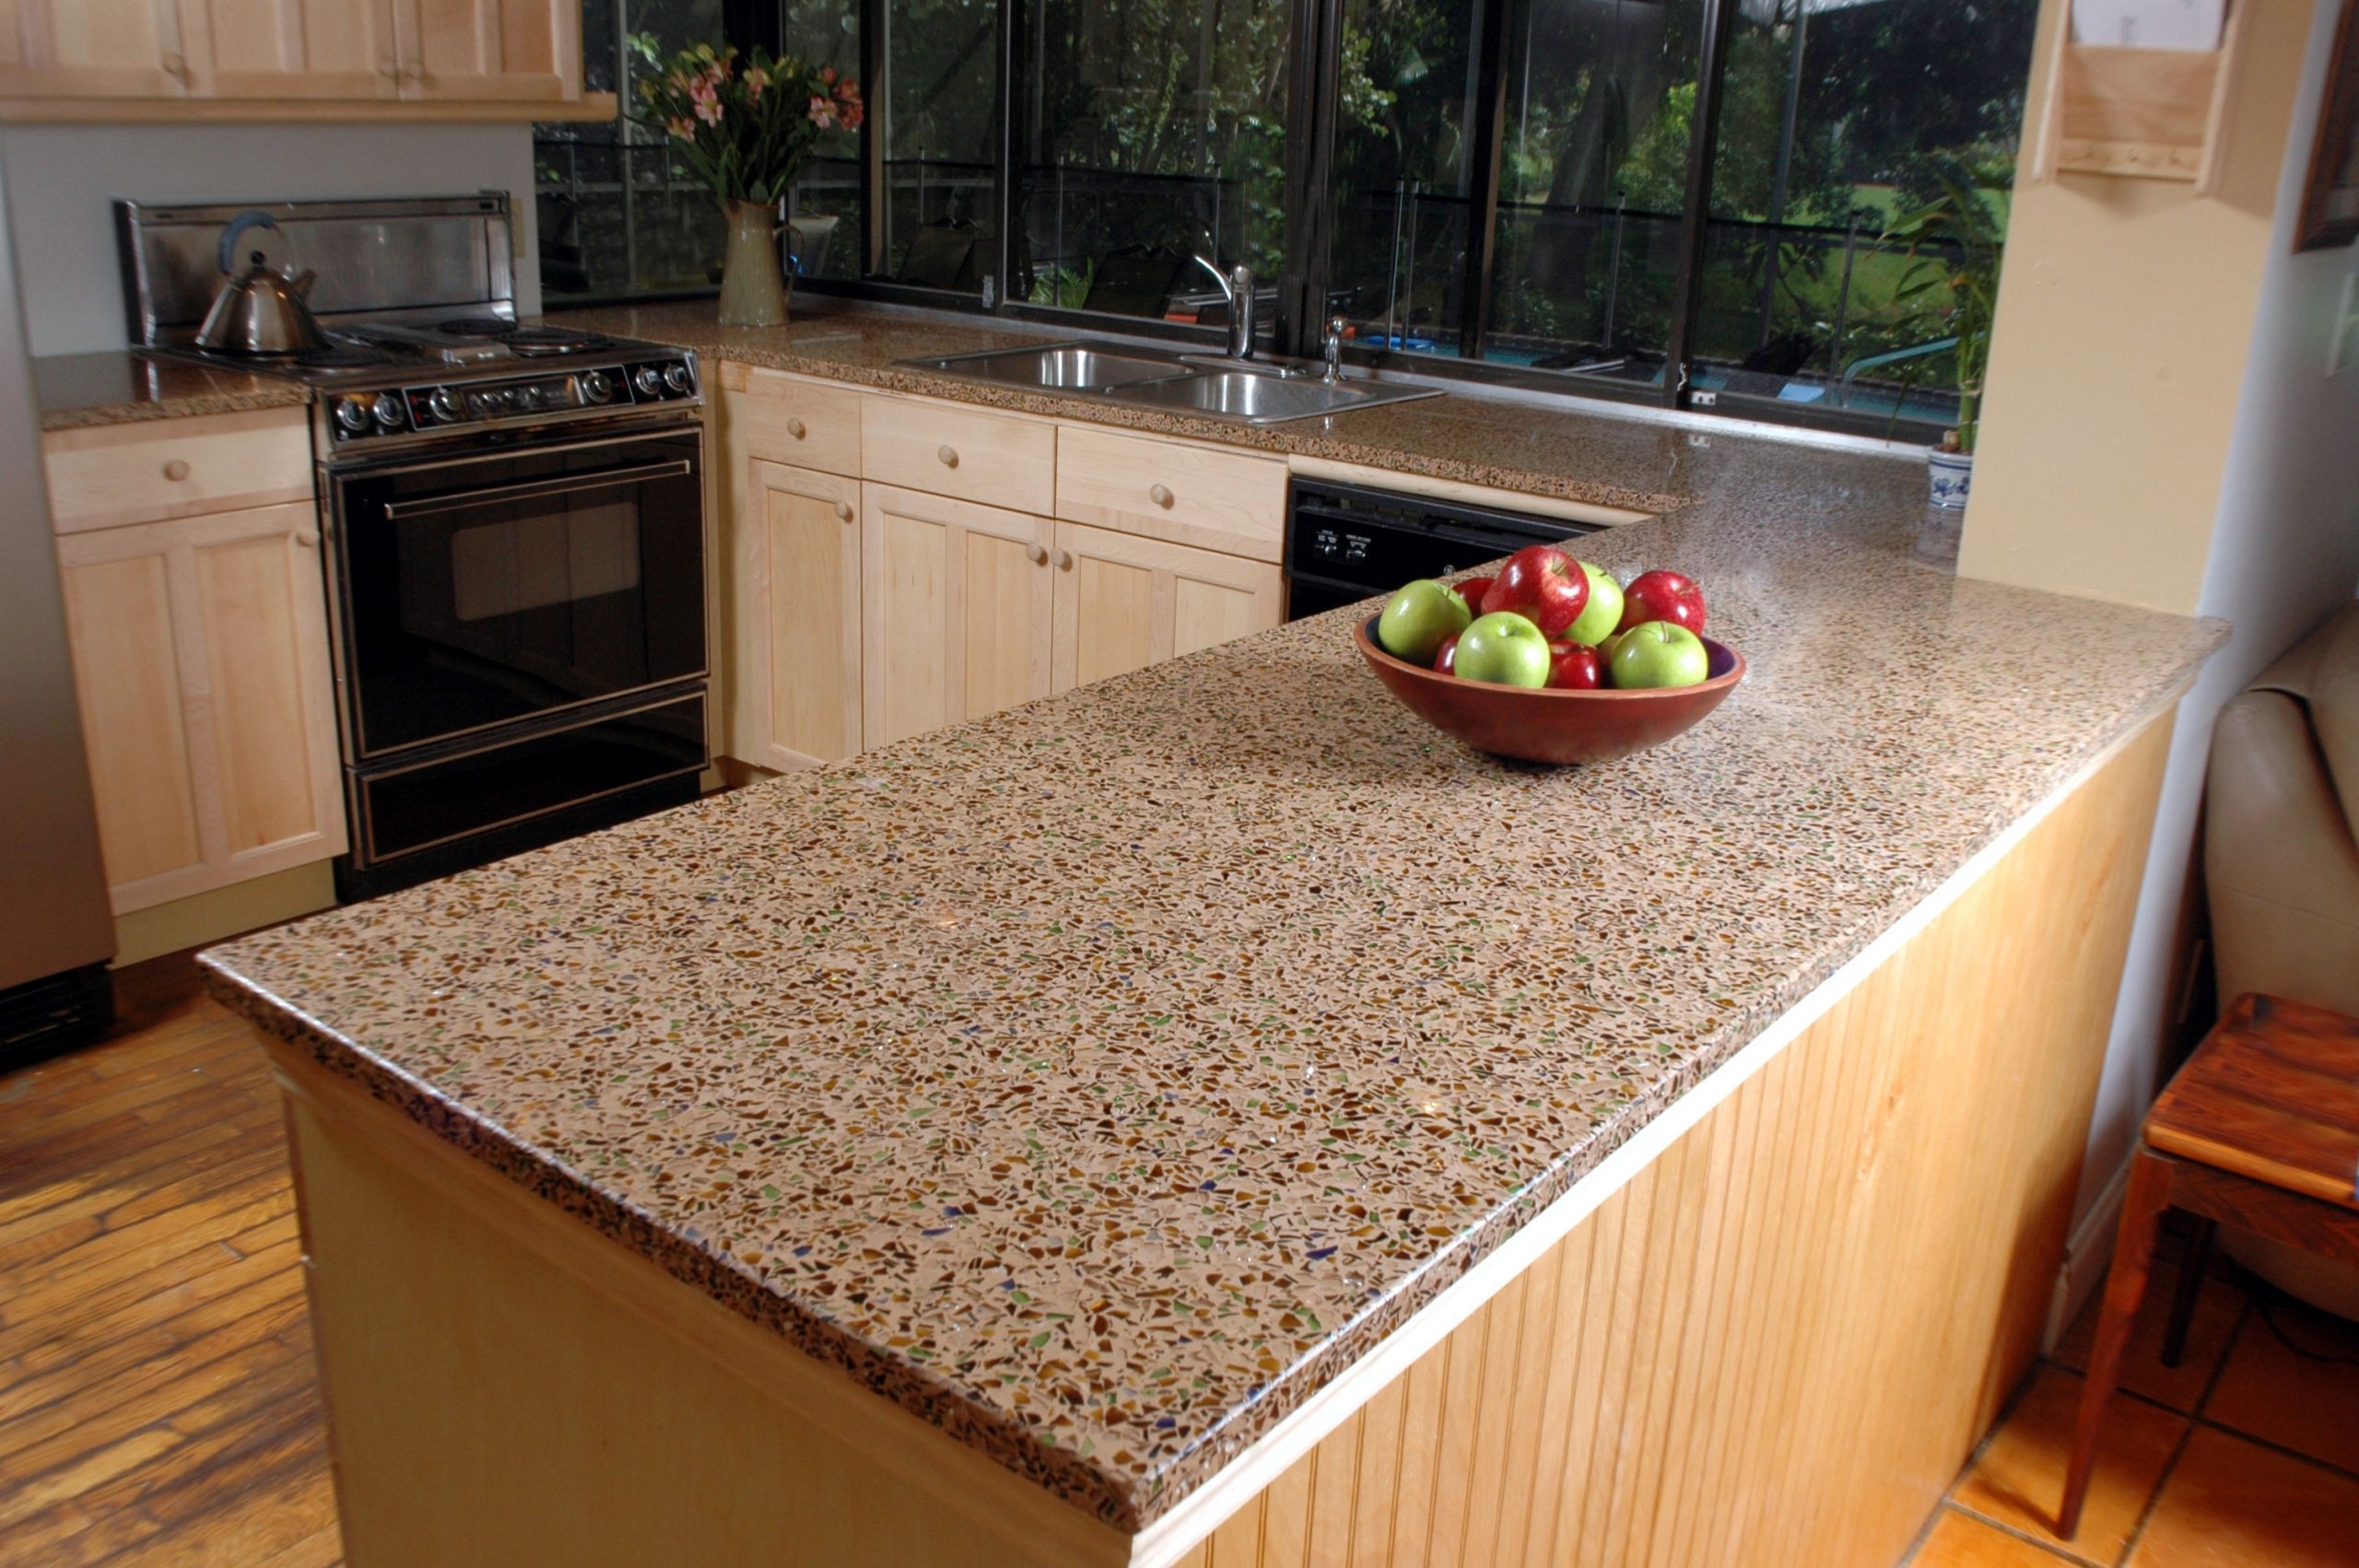 Best Kitchen Counter Material
 Countertop Material Options